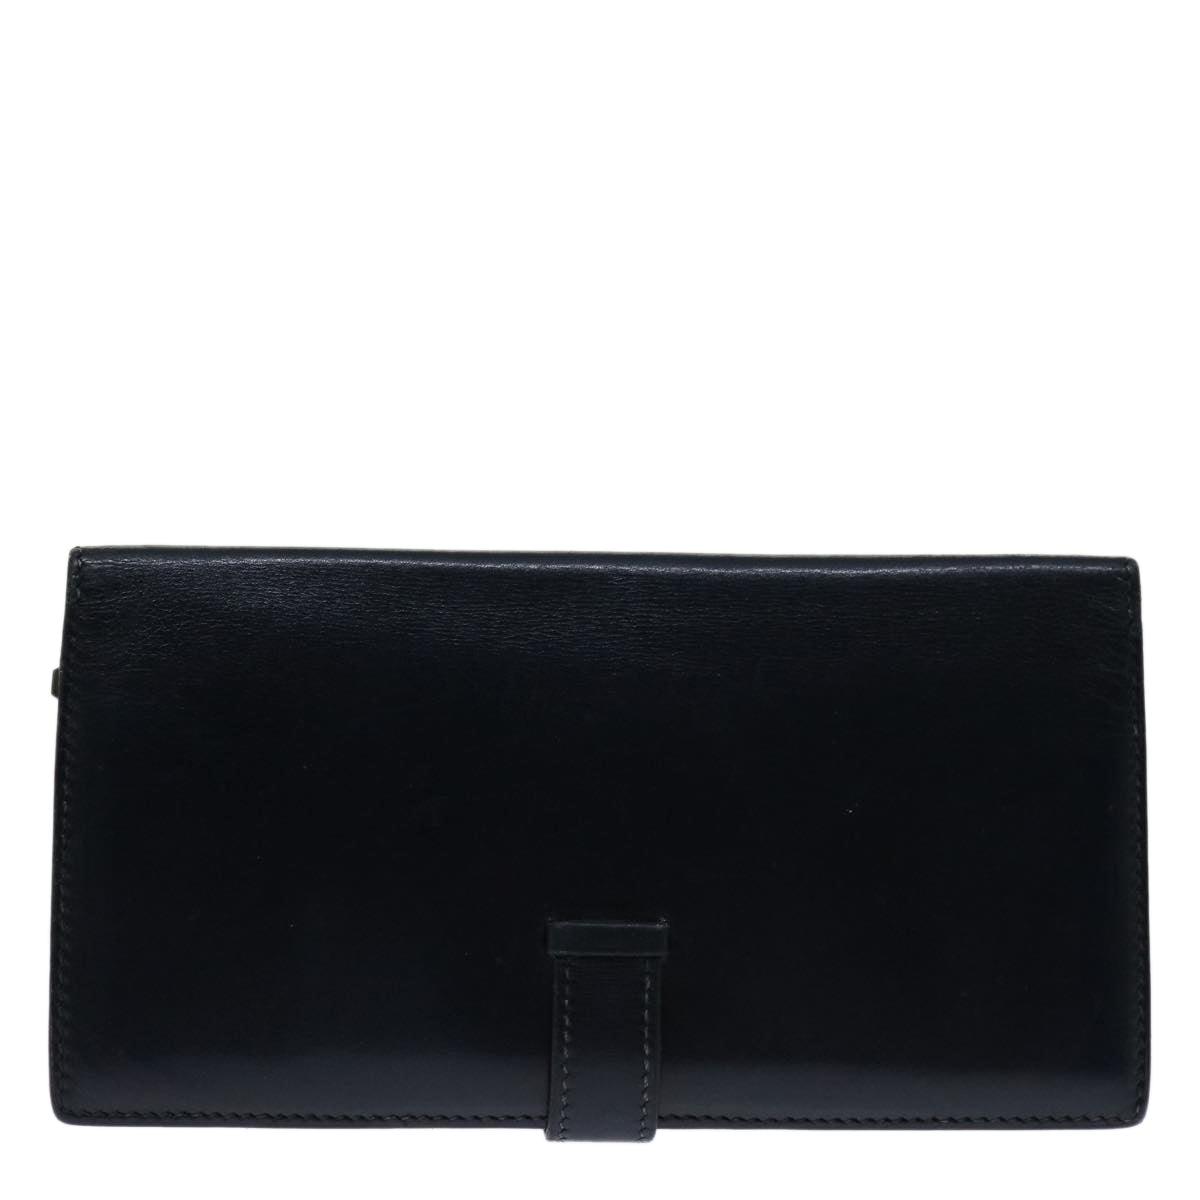 HERMES Long Wallet Leather Black Auth bs12726 - 0